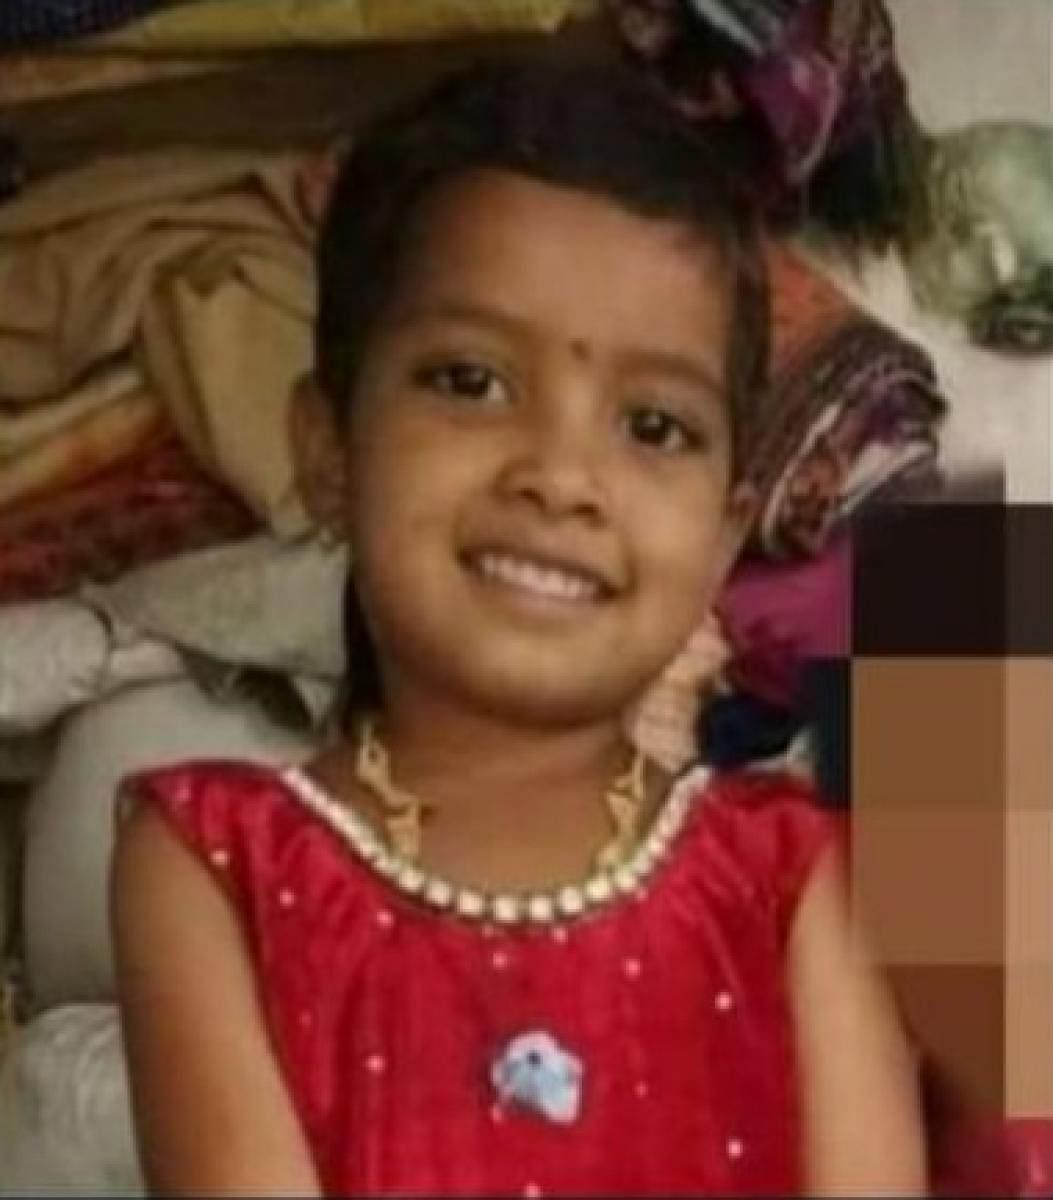 Shwetha, daughter of Ningappa Pujari of the village went missing from the village on December 5.